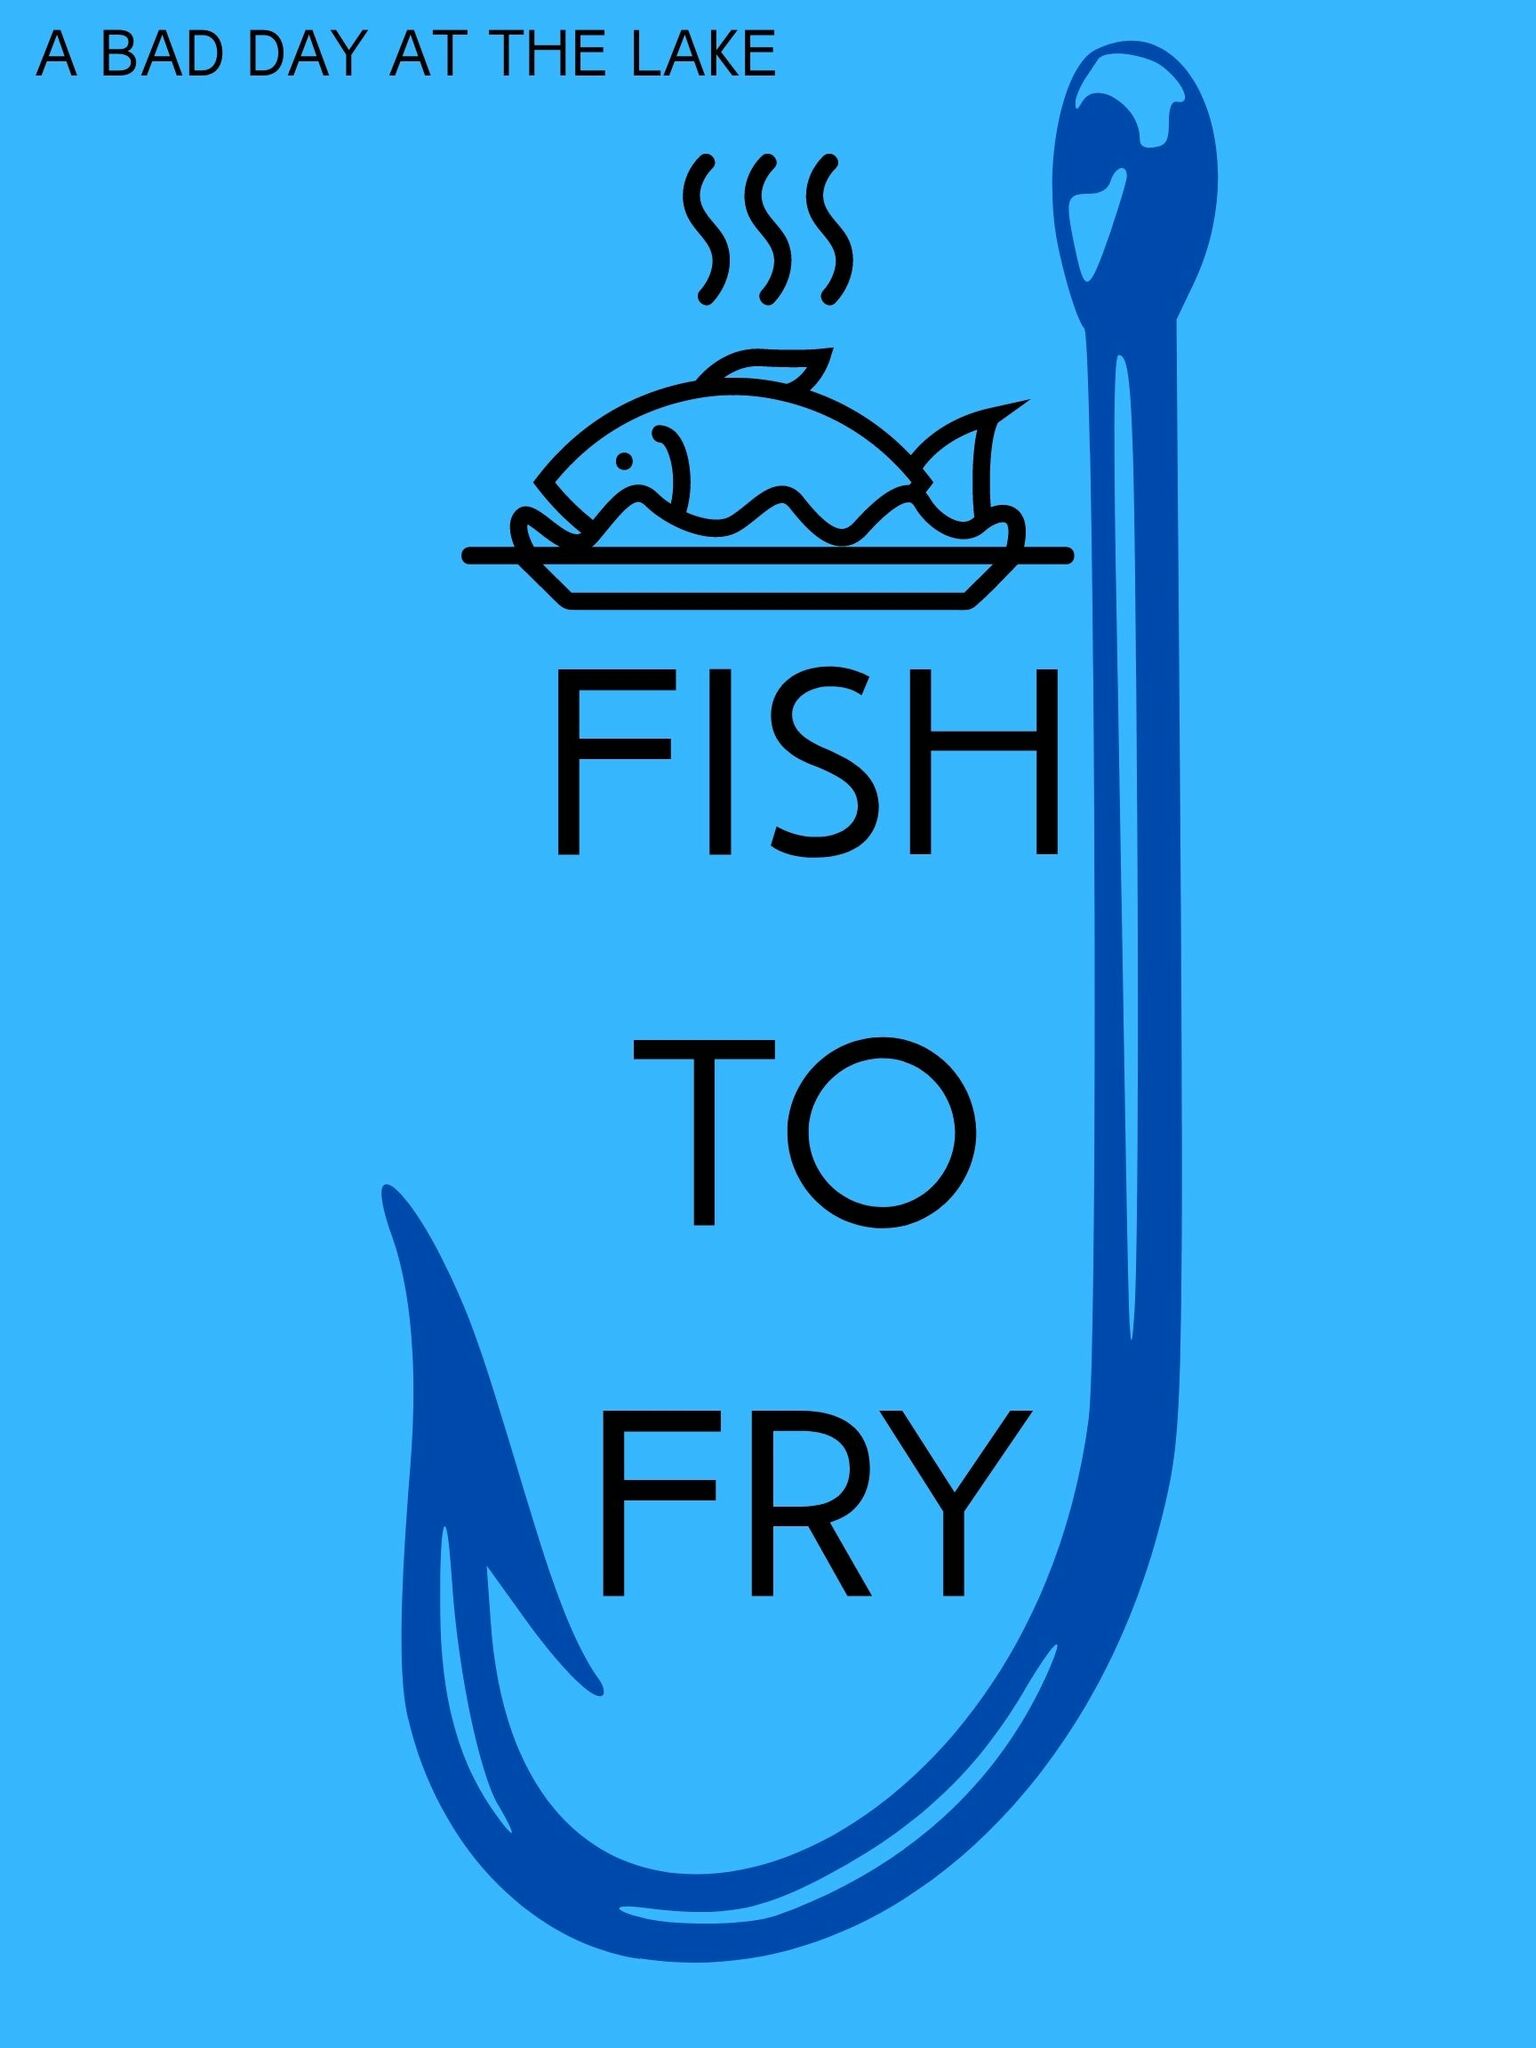 FISH TO FRY